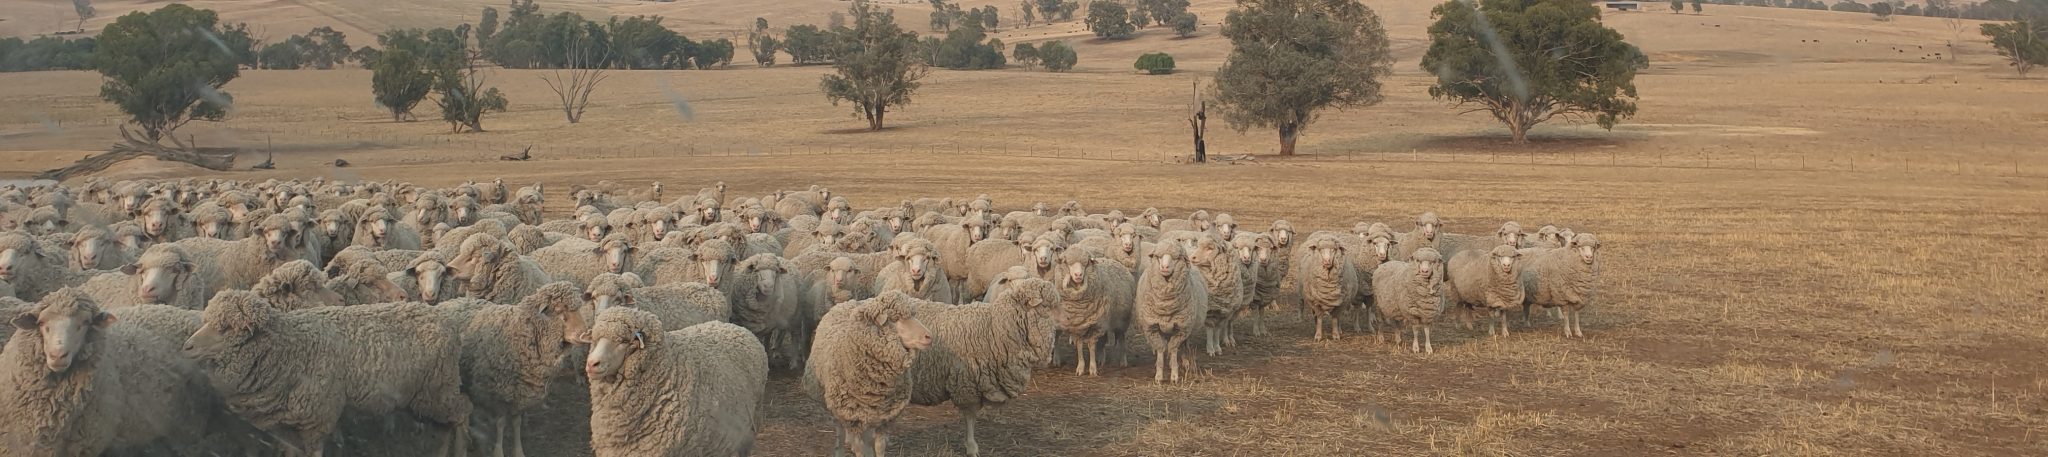 Mob of sheep in a dry grass paddock with scattered paddock trees in the background